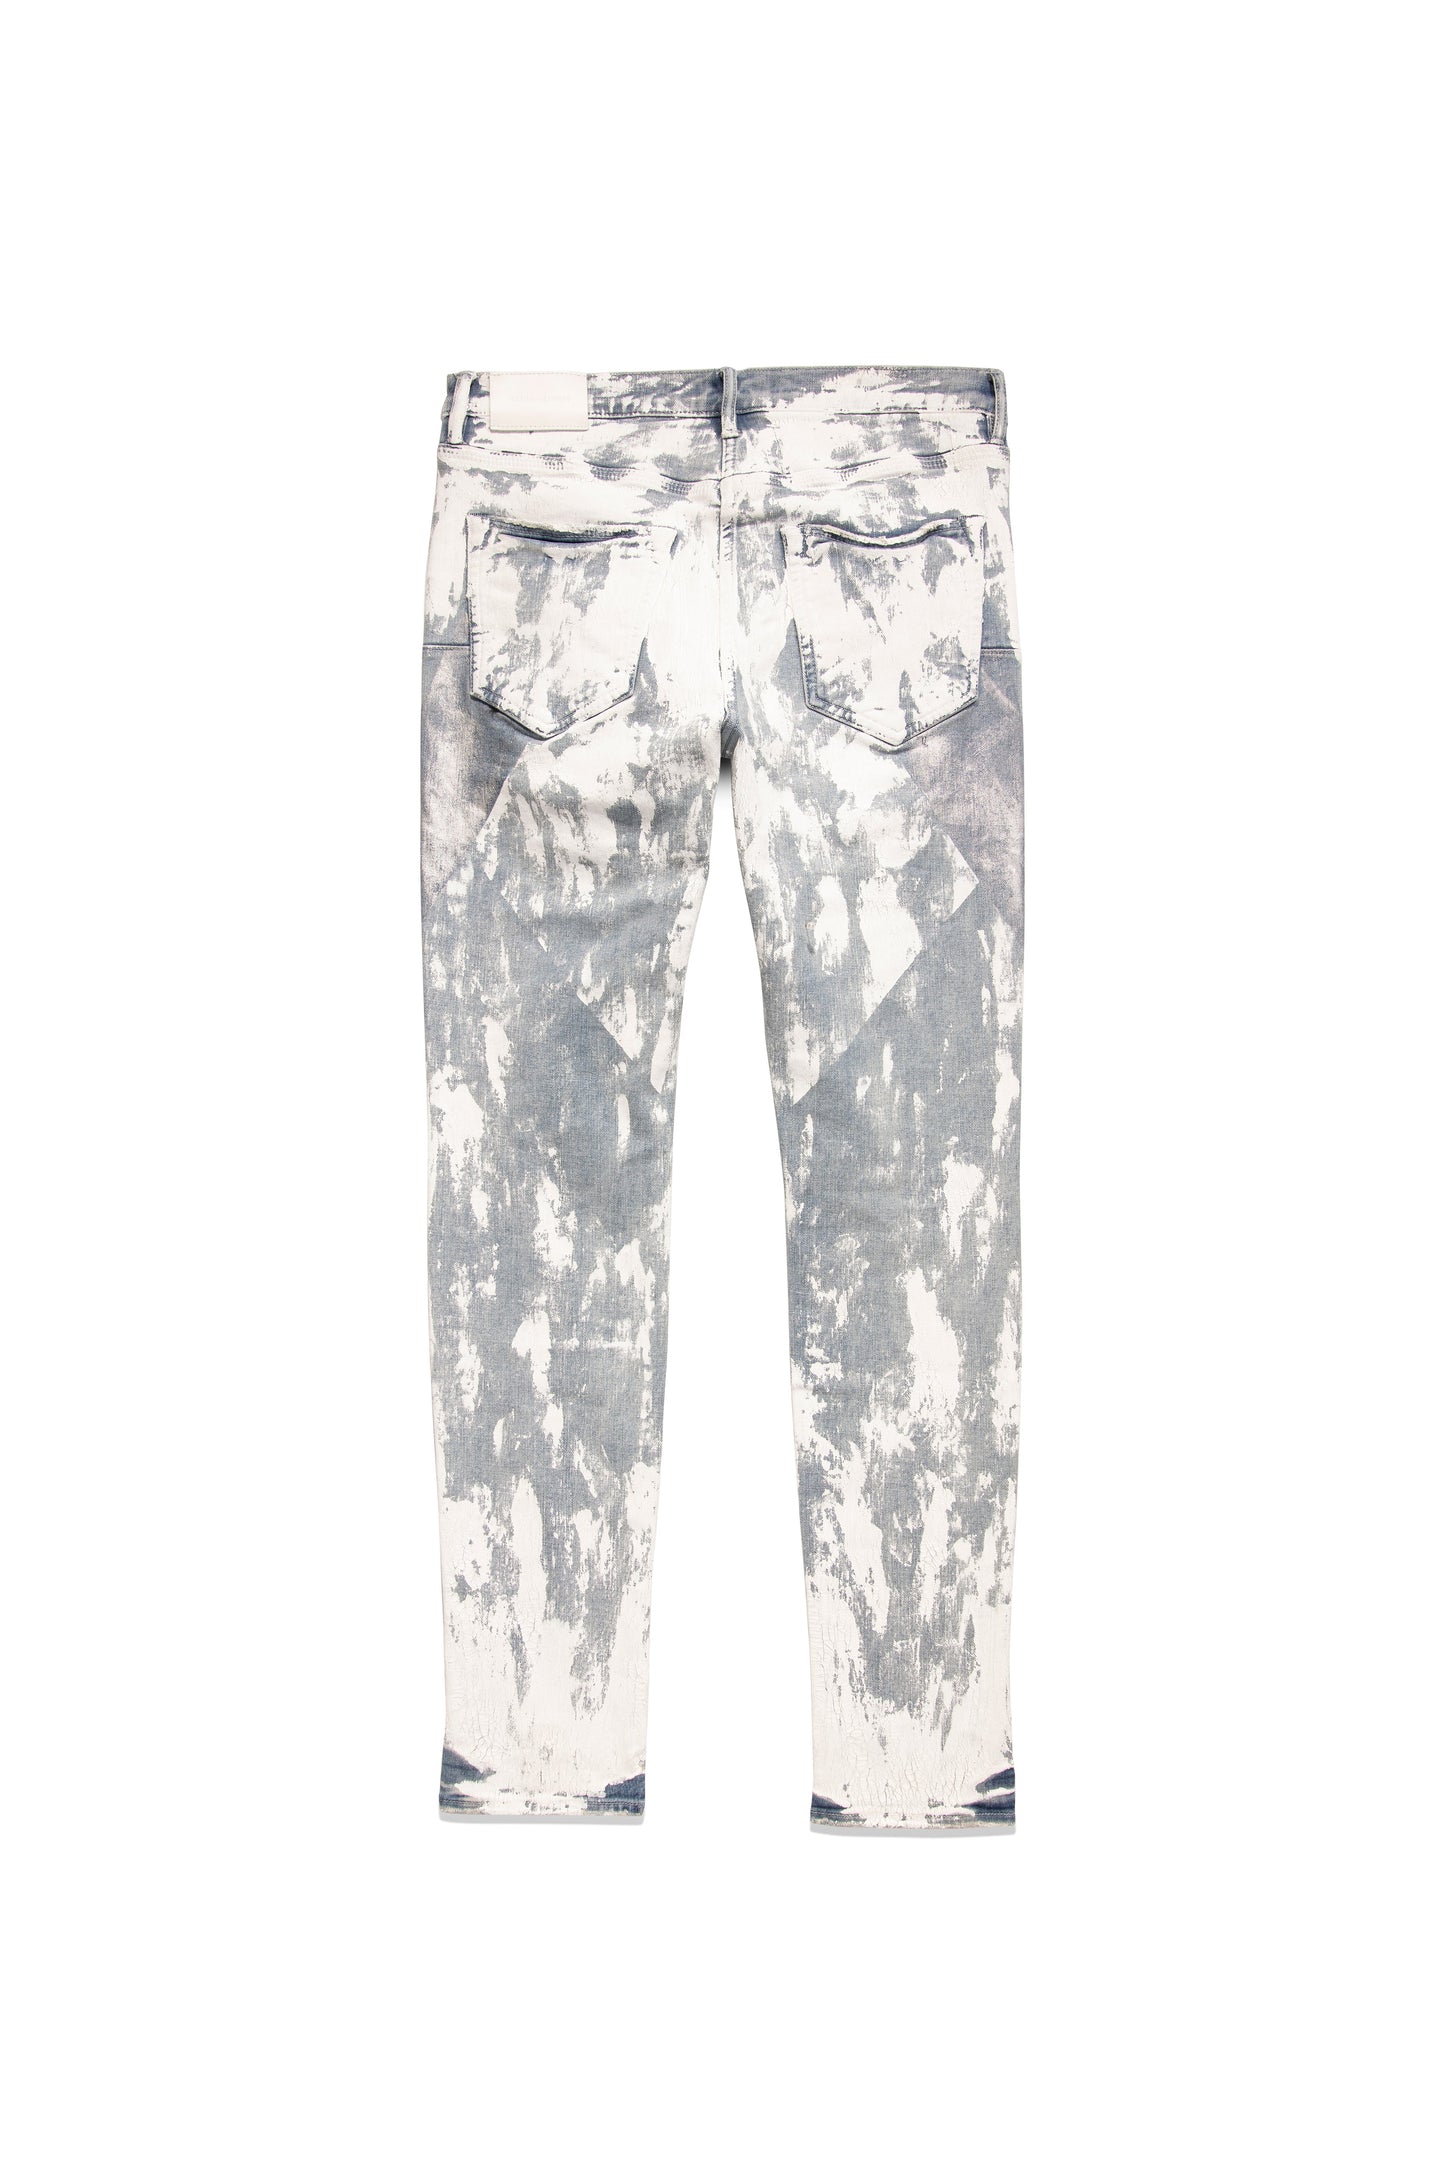 P001 LOW RISE SKINNY JEAN - Light Indigo Crackle Paint With Foil